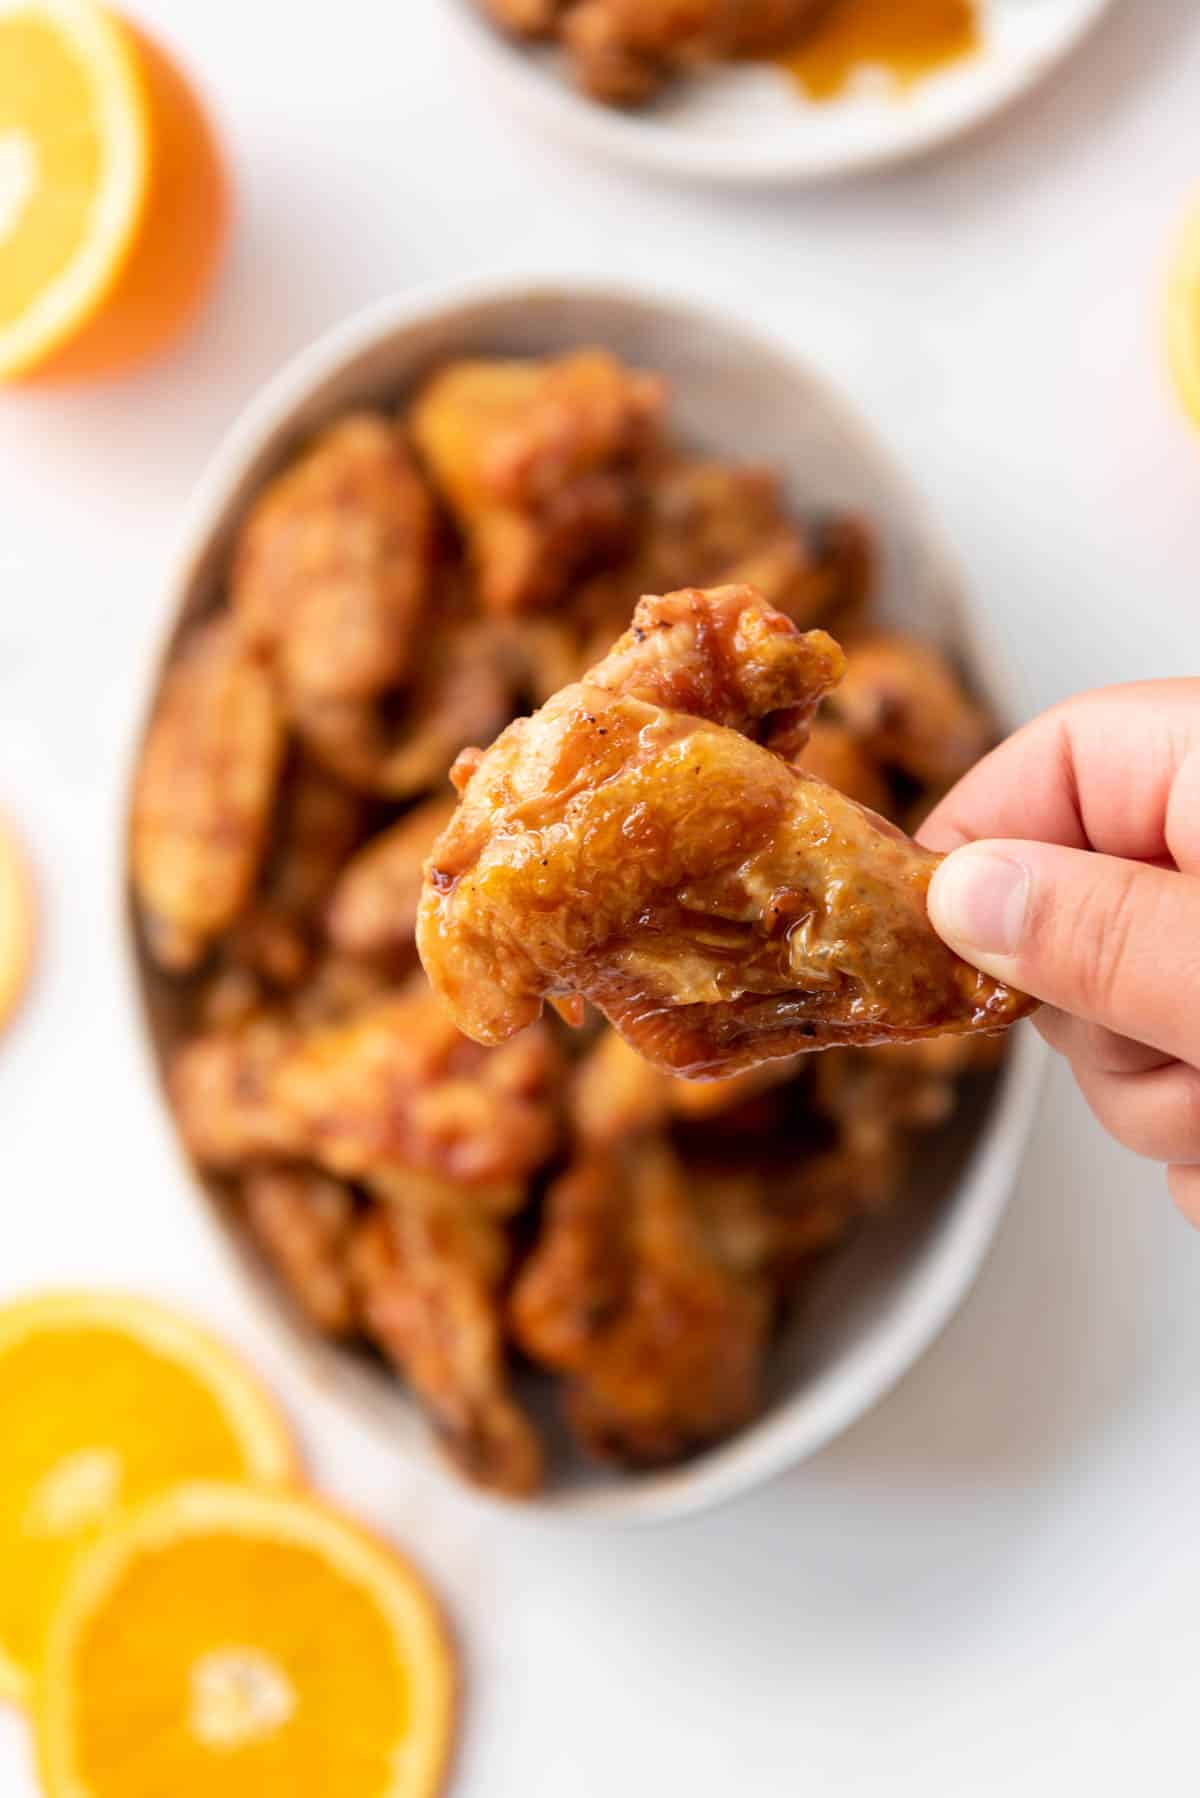 A hand holding a crispy orange chicken wing over a bowl of wings.